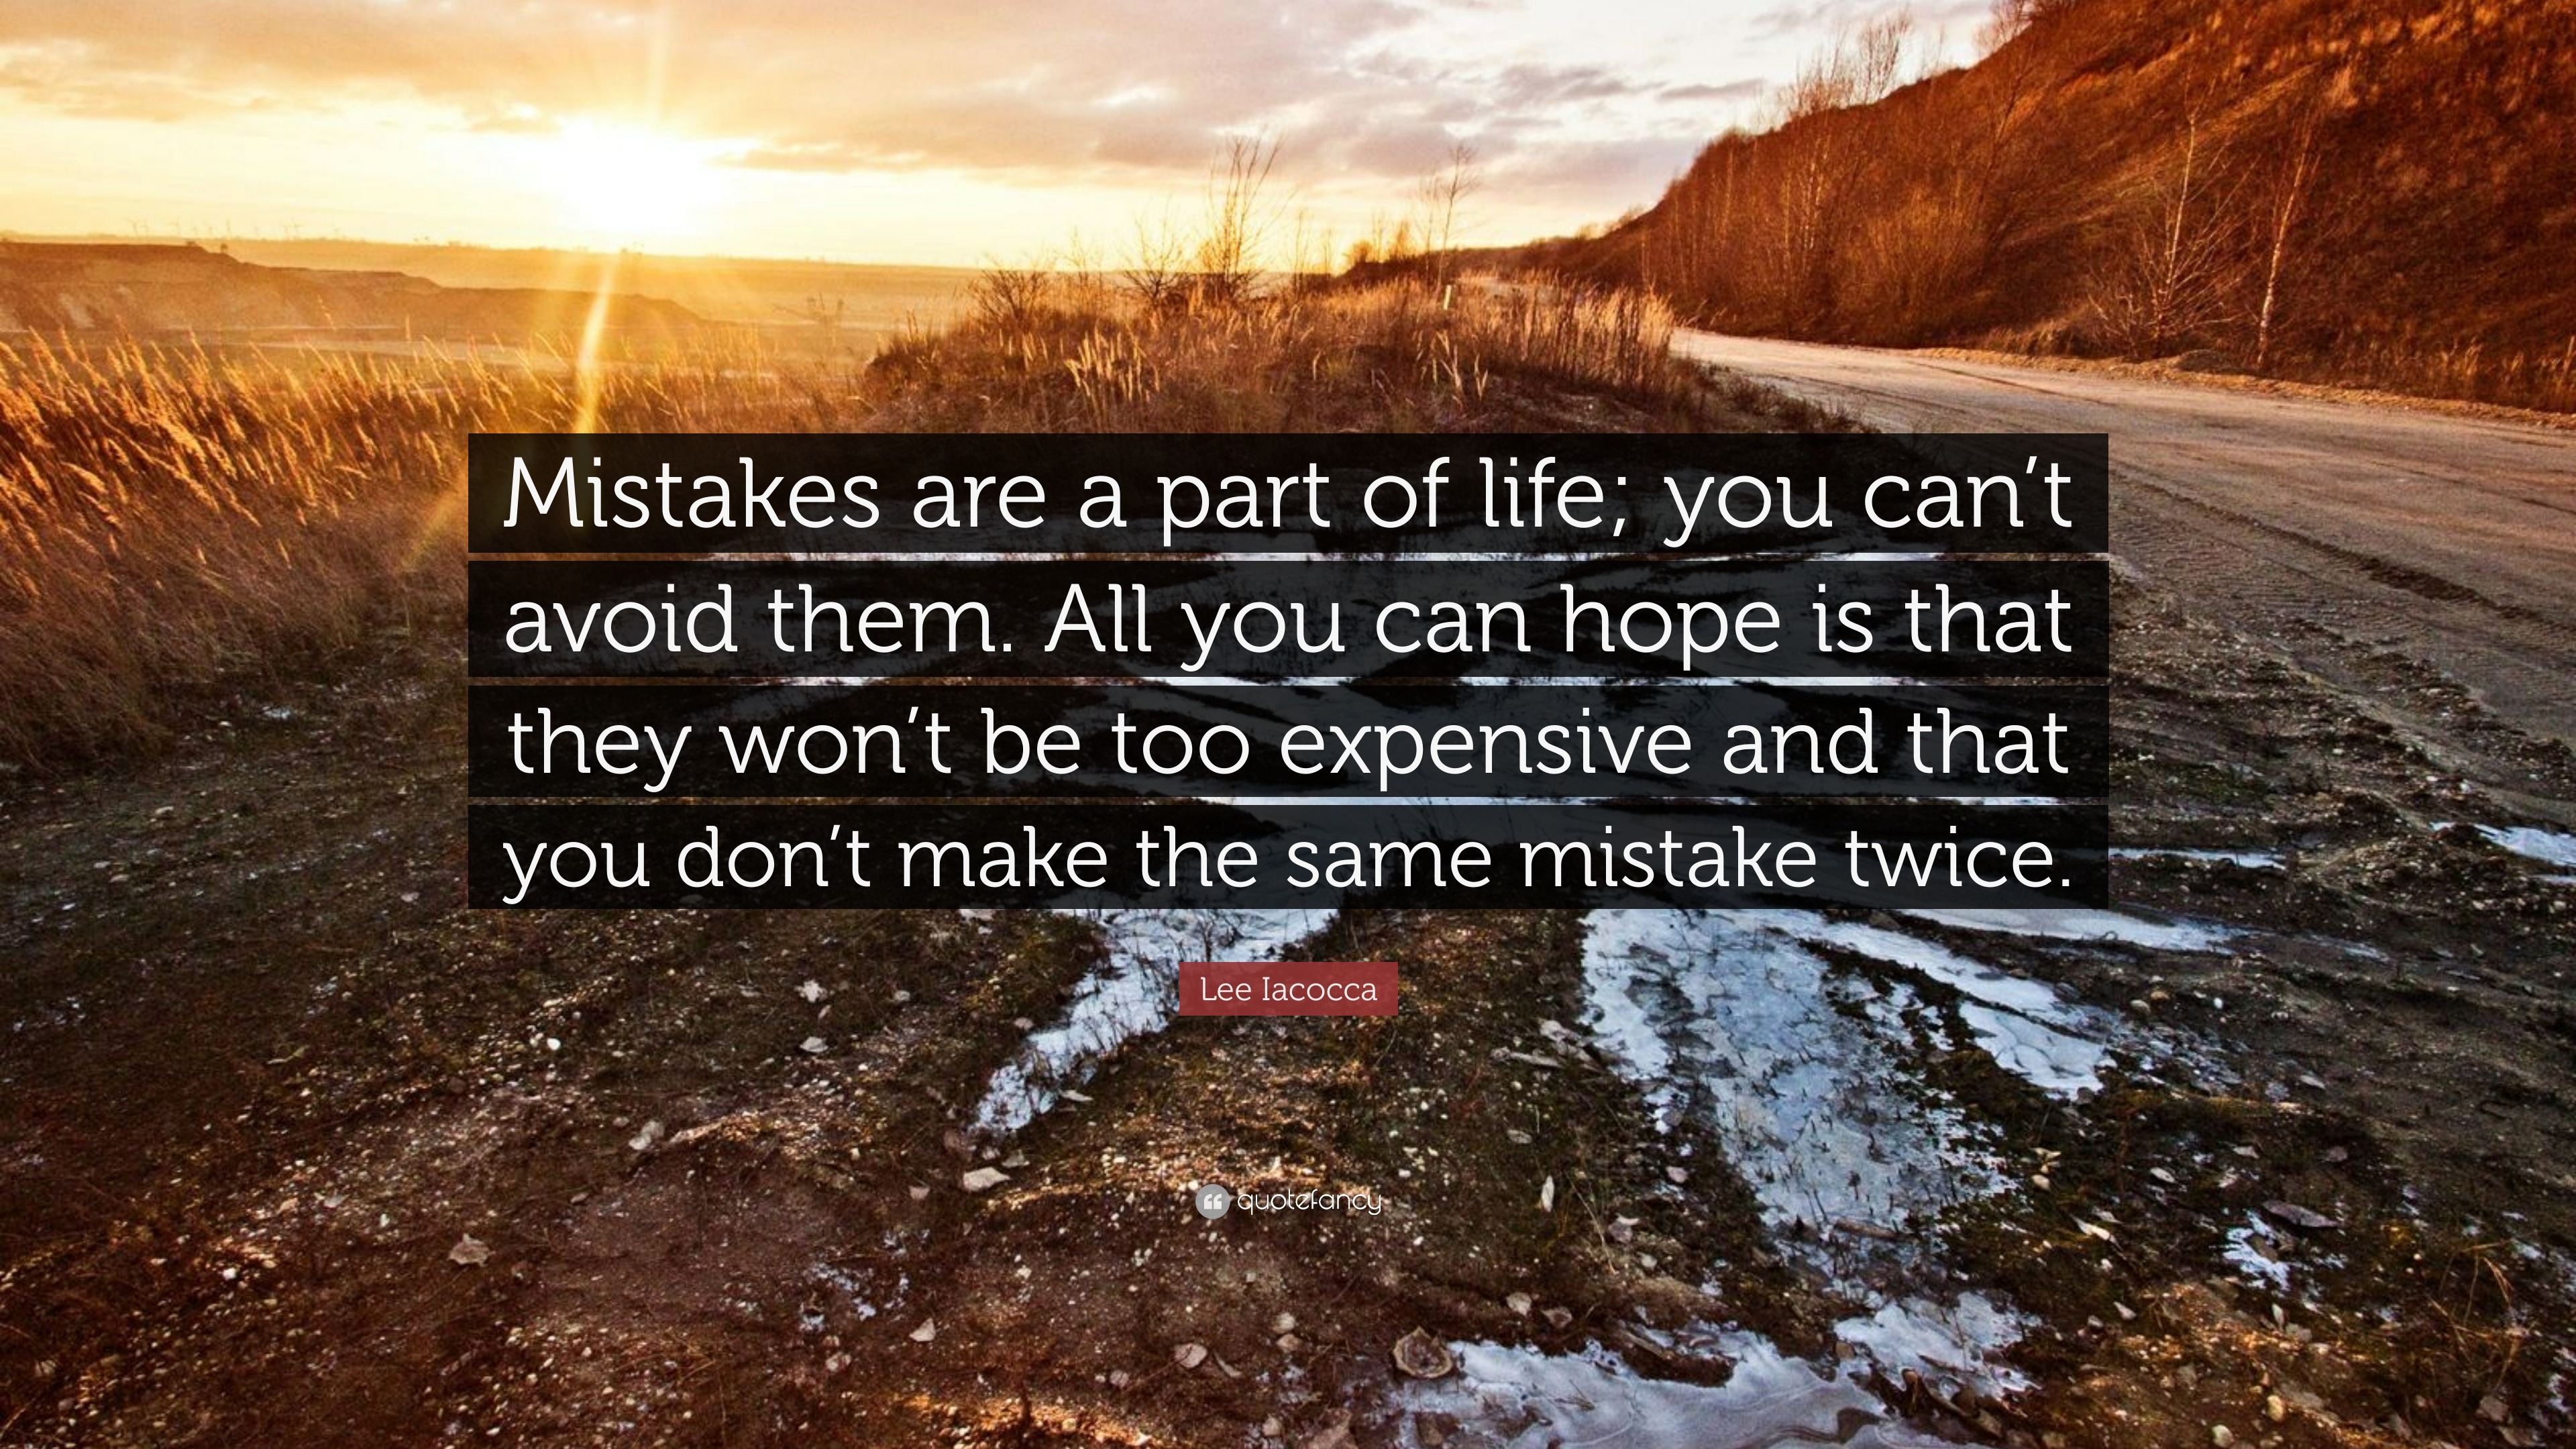 Your mistakes, like mine, are a part of who you are now. You can't